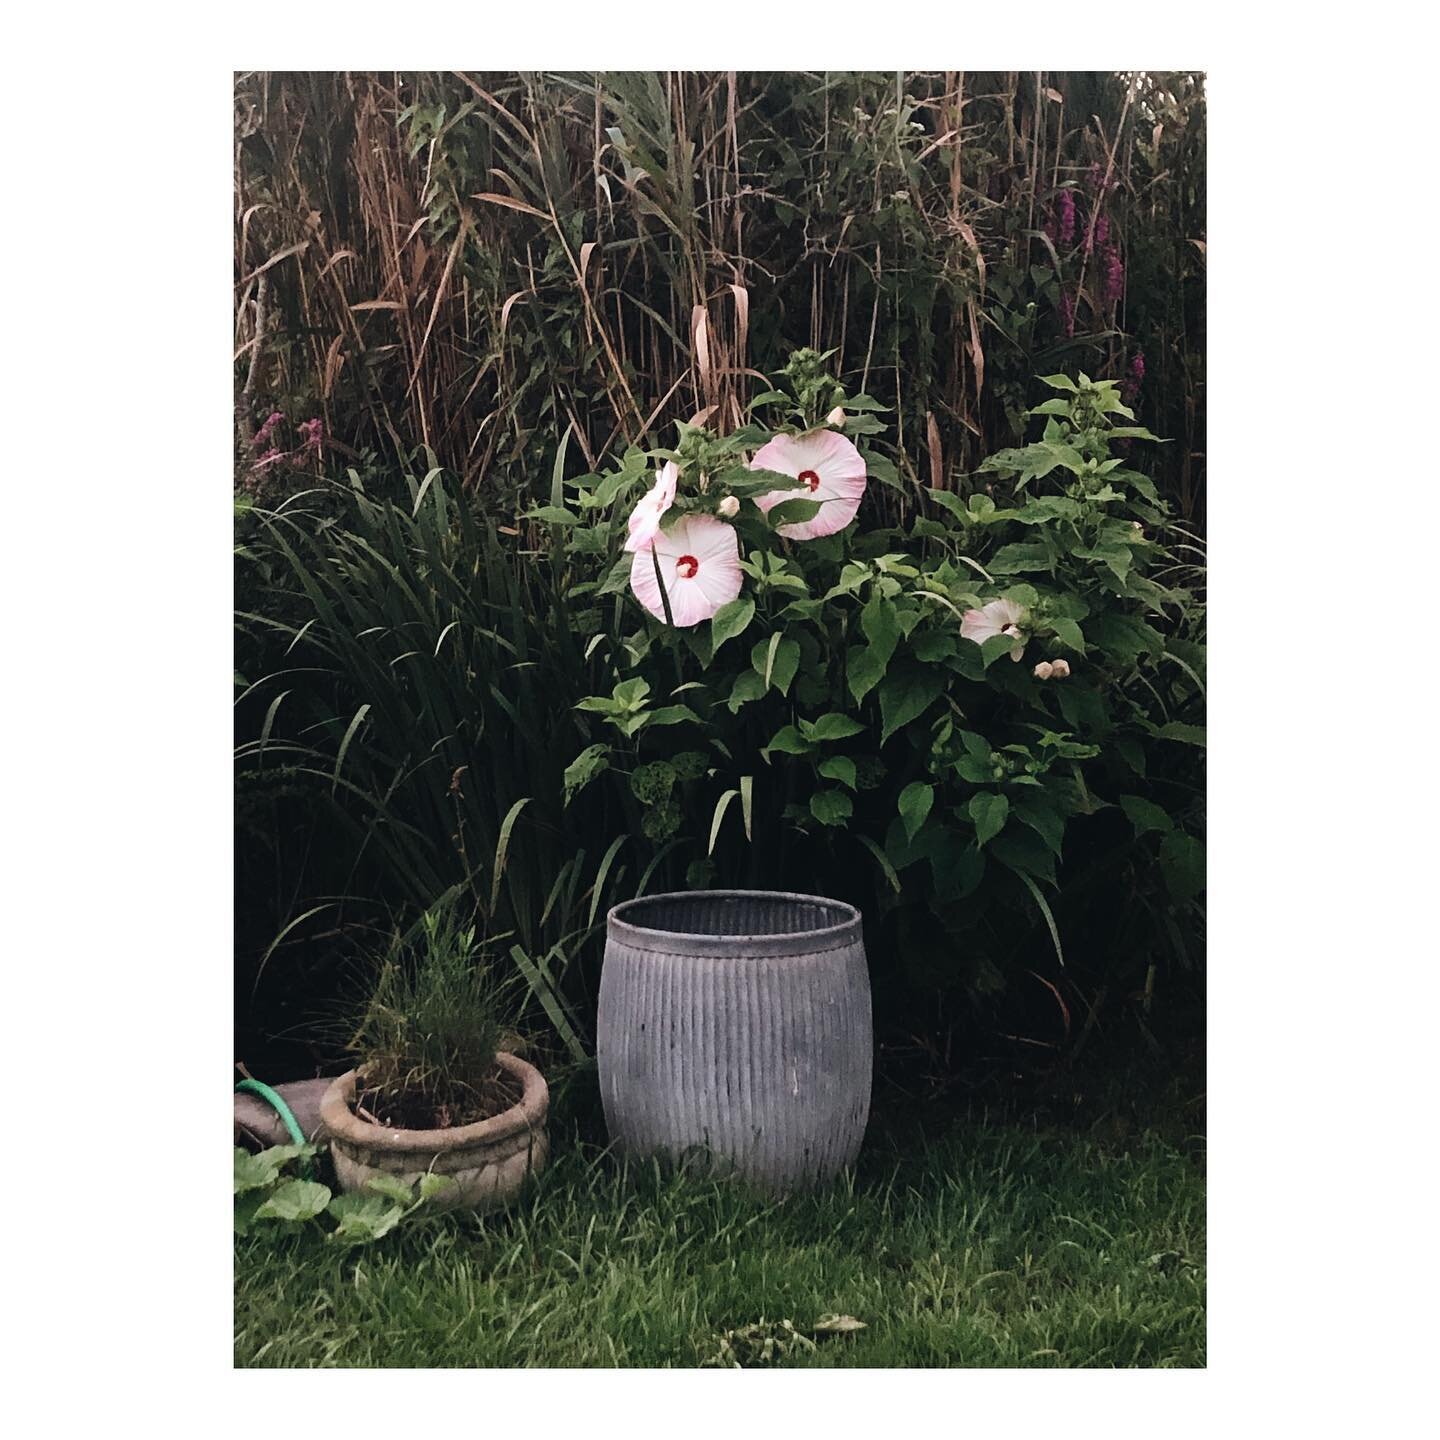 s u n d a y s e r e n i t y

sunrise in the garden. the best way to start the day. 

giant marshmallows  popping overnight. exploding yarrow against our tomato jungle - this hot dry summer has made for the best tomato season in a long time. 
bring on